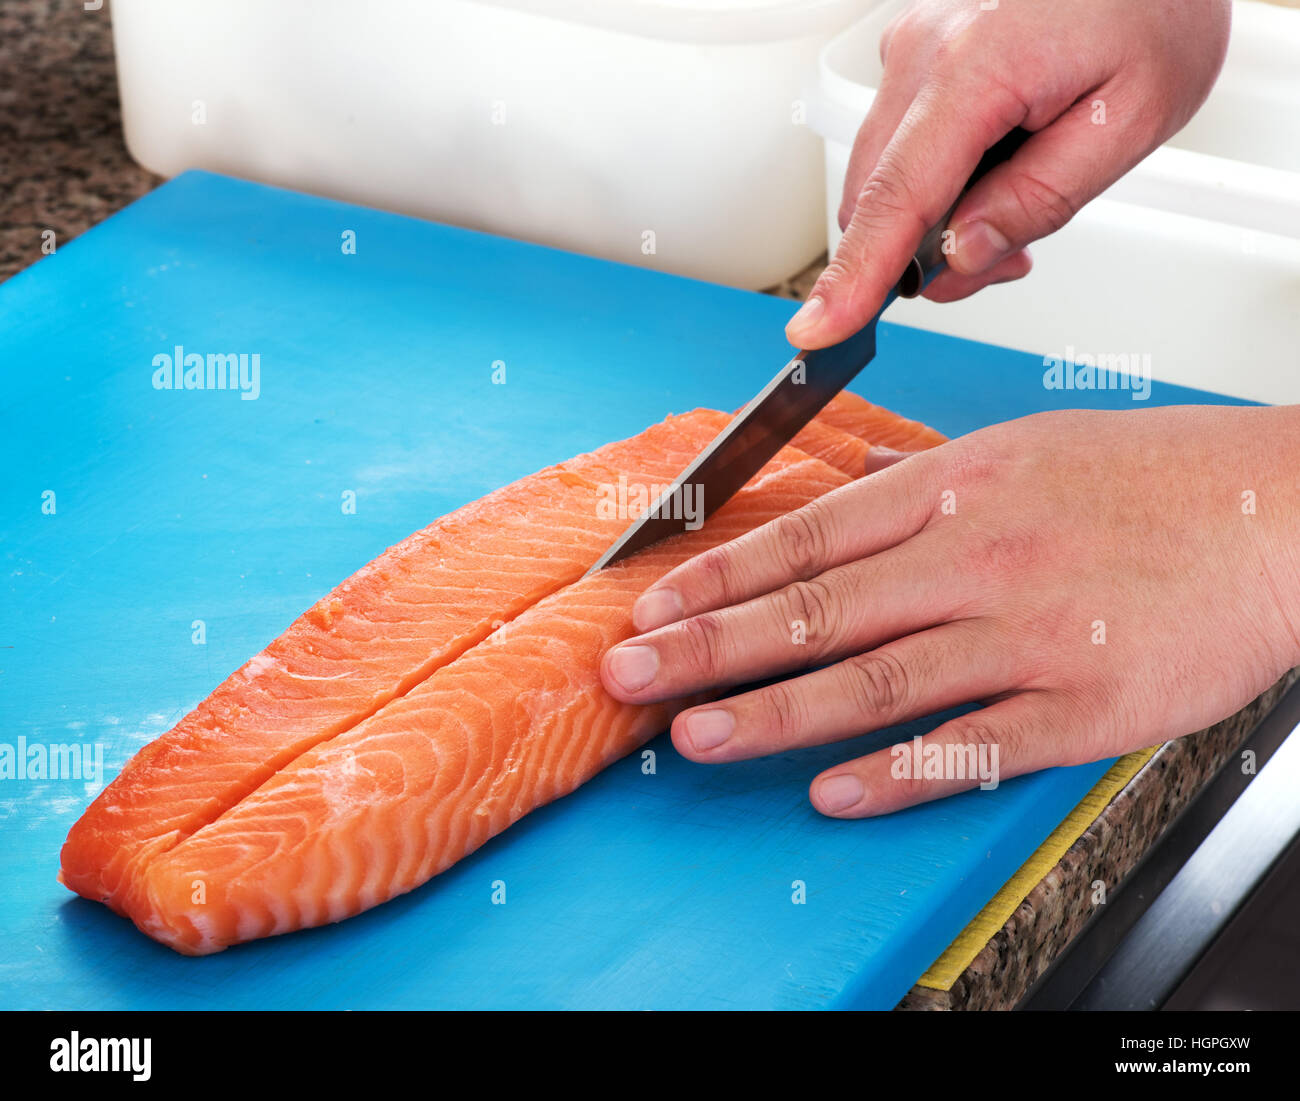 Sushi chef slicing a raw fresh salmon fillet with a sharp knife on a blue cutting board in a restaurant, close up of his hands Stock Photo